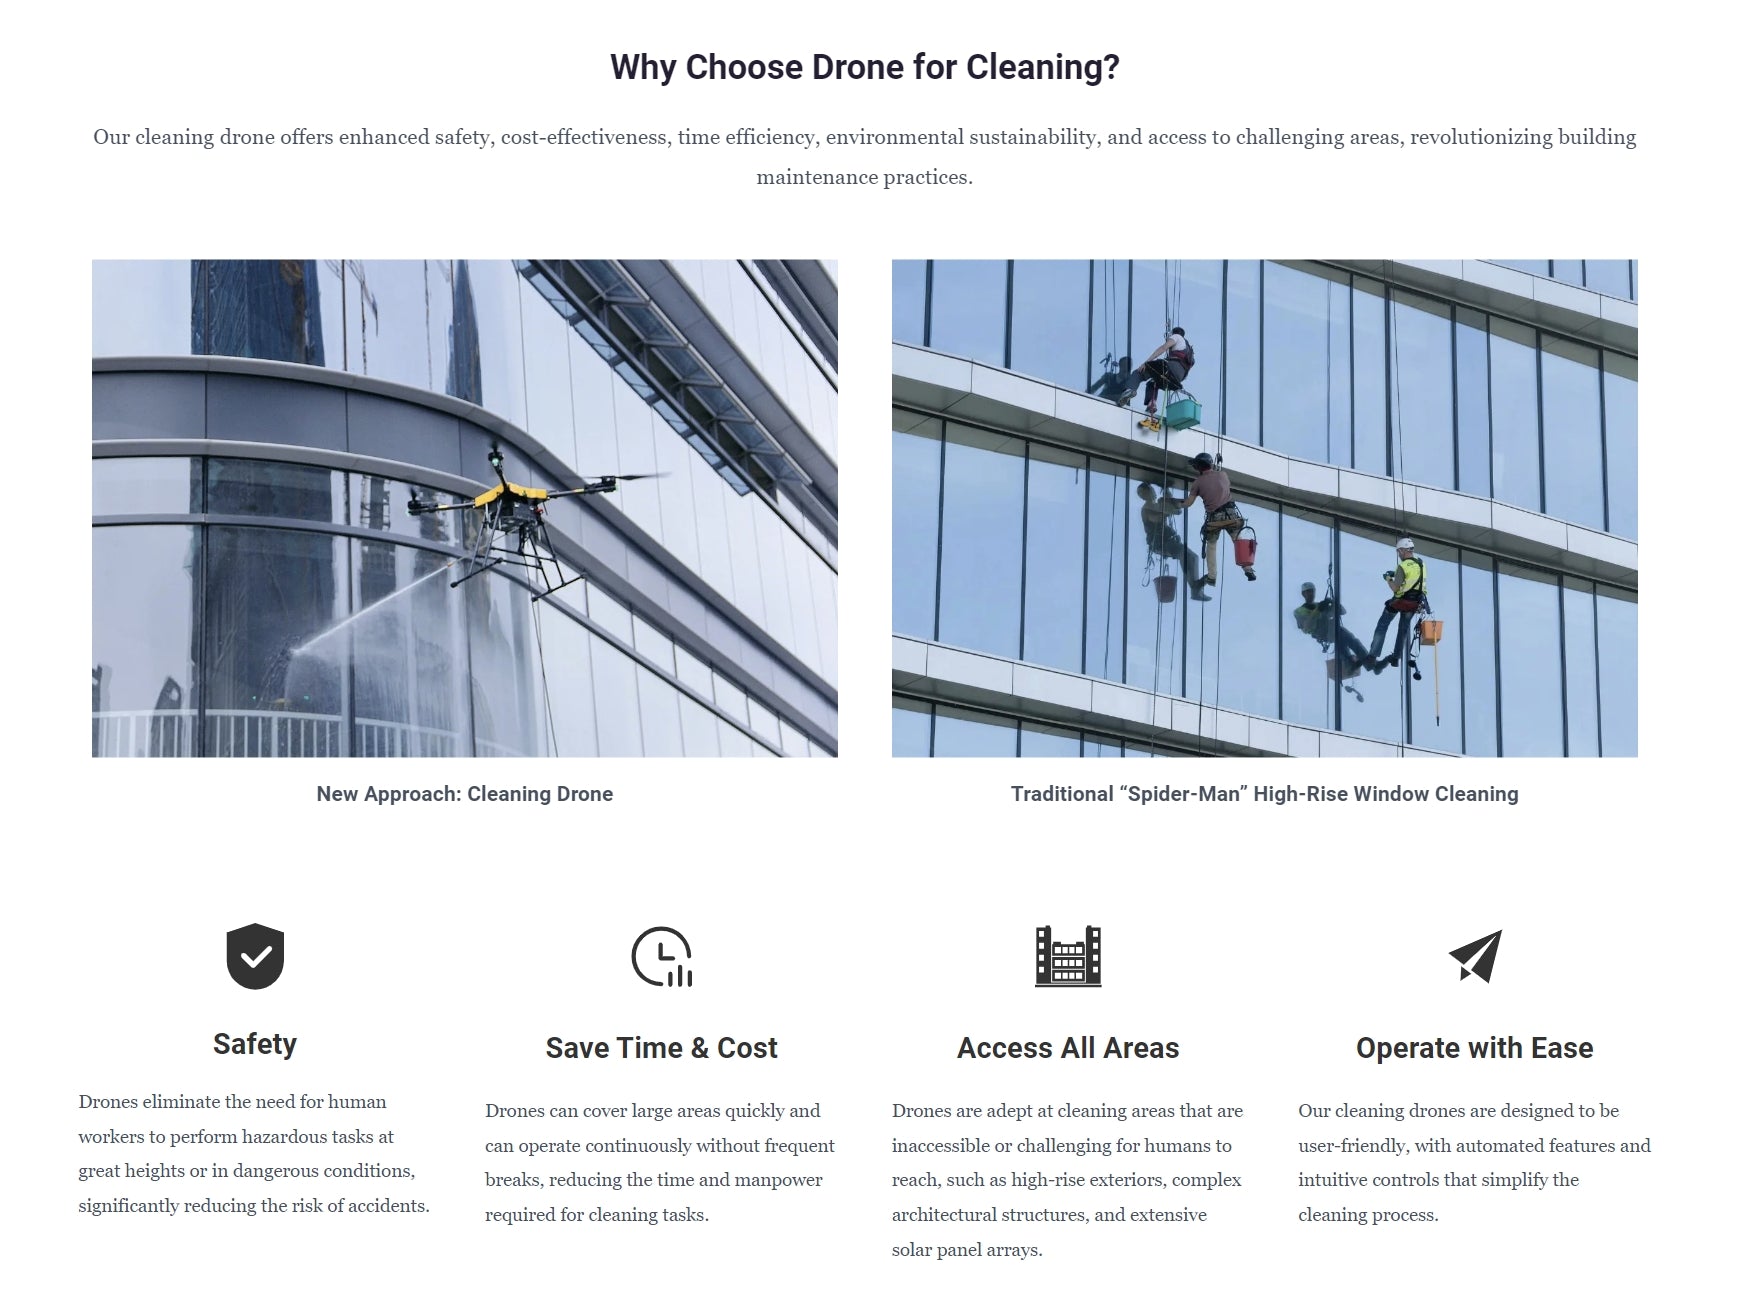 RCDrone, 'cleaning drone offers enhanced safety, cost-effectiveness, time efficiency; environmental sustainability